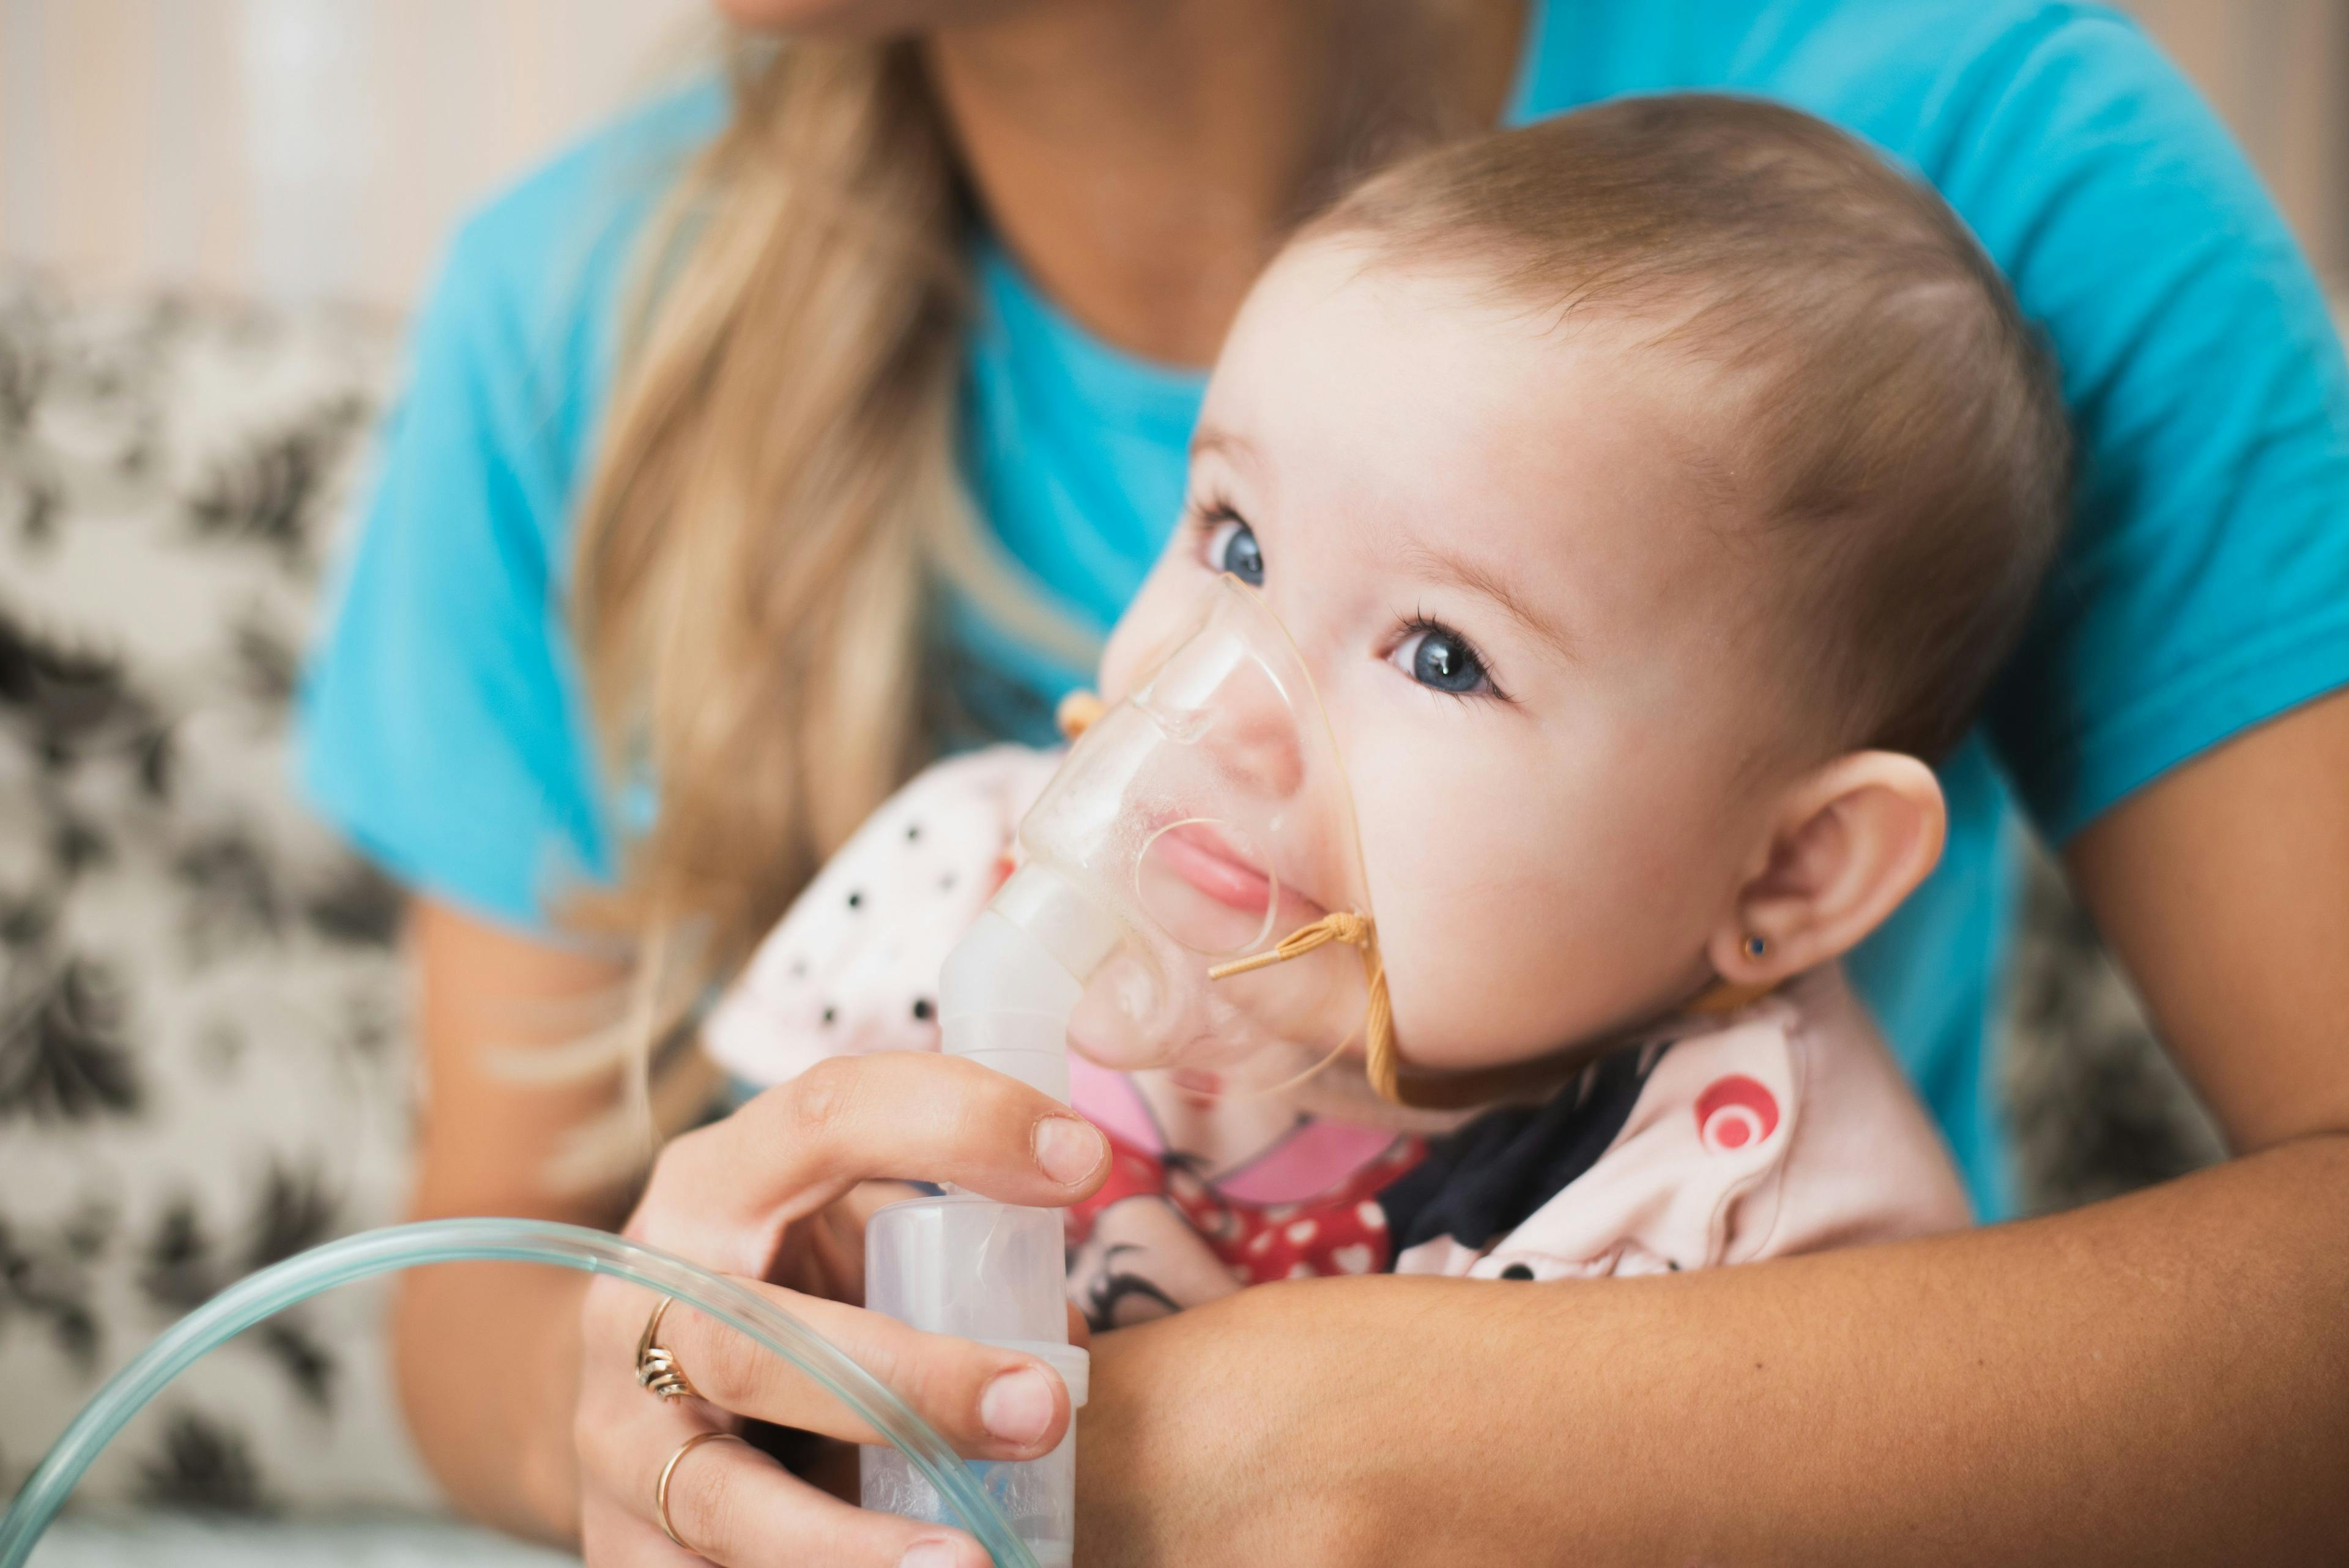 A single-dose injection of nirsevimab before RSV season was proven to reduce infants’ risk of lower respiratory tract infection by 74.5%.